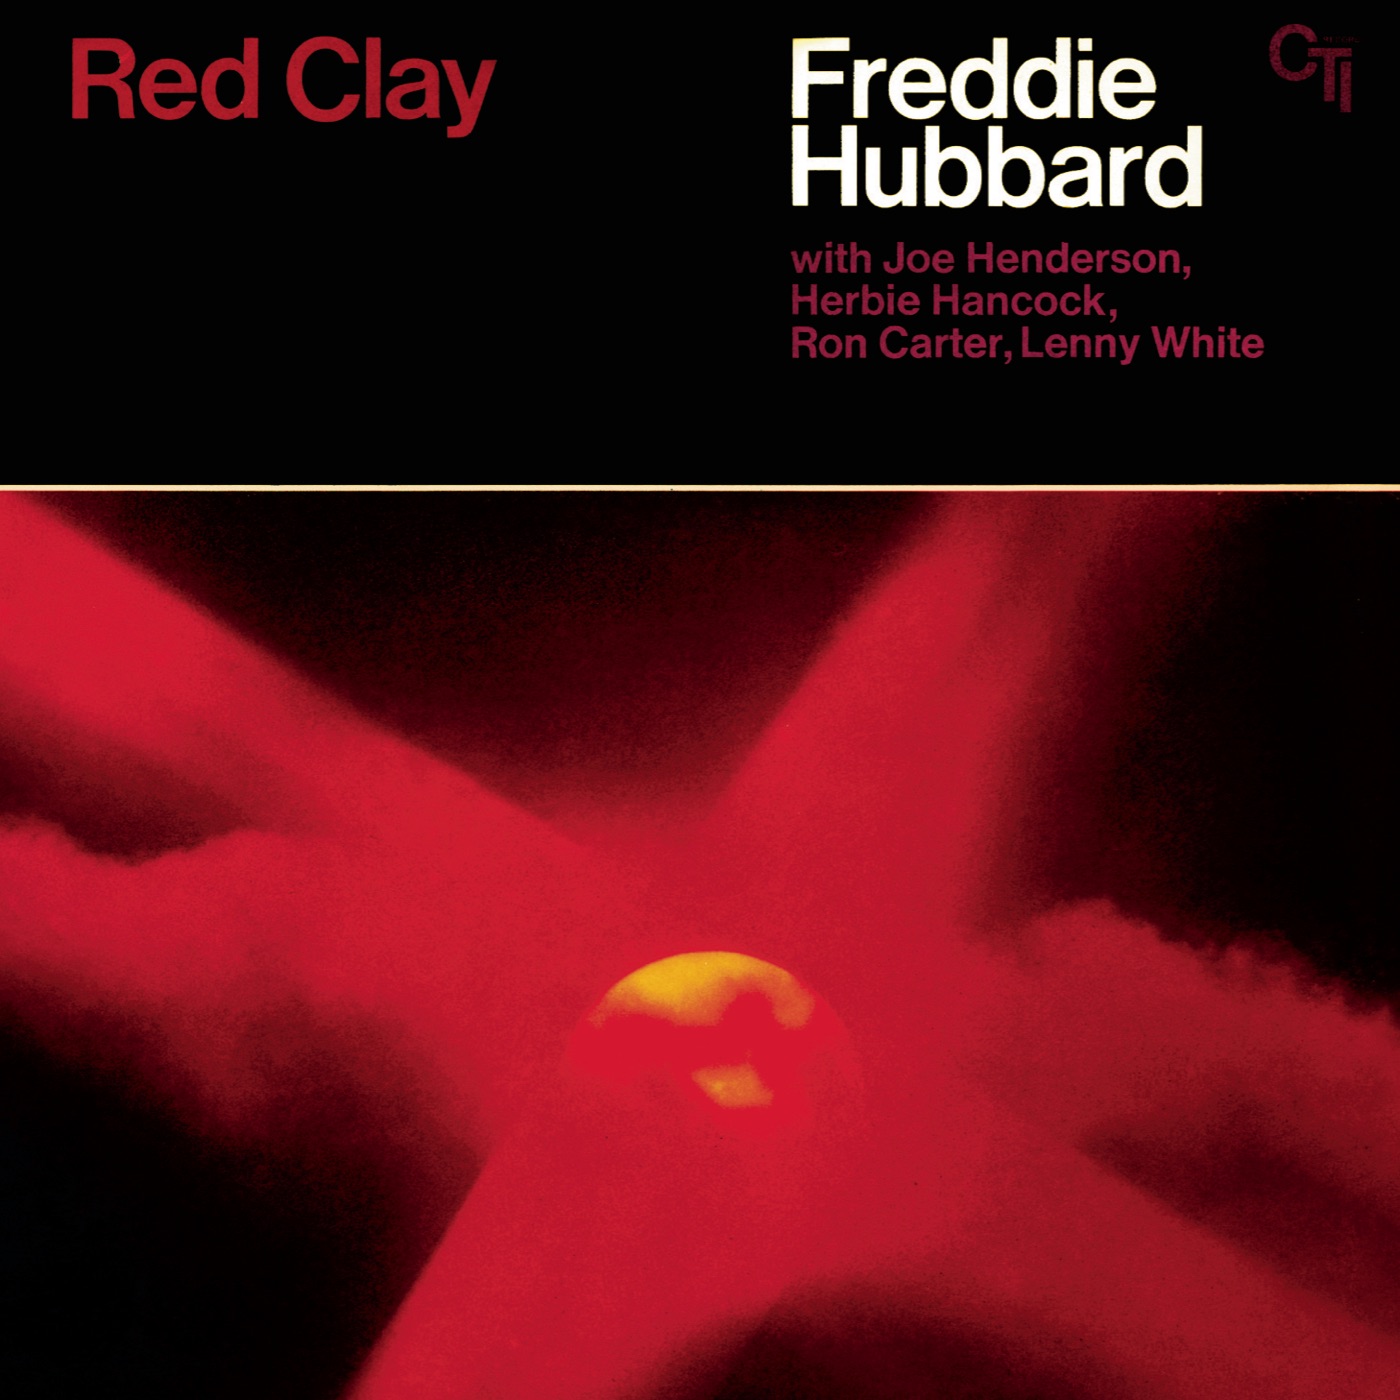 Red Clay by Freddie Hubbard